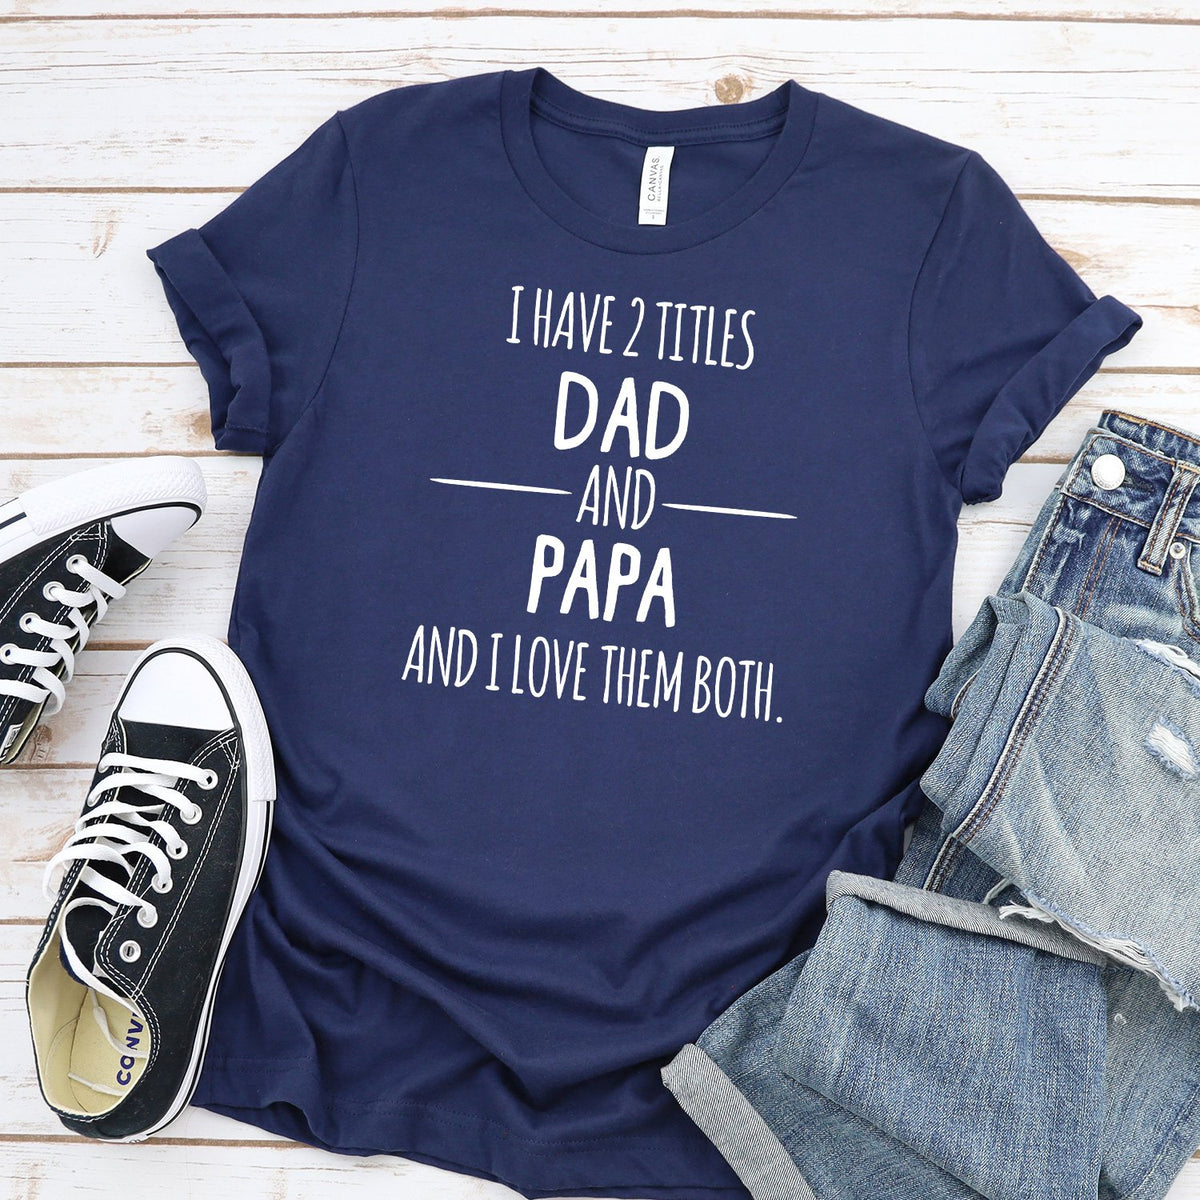 I Have 2 Titles Dad and Papa and I Love Them Both - Short Sleeve Tee Shirt